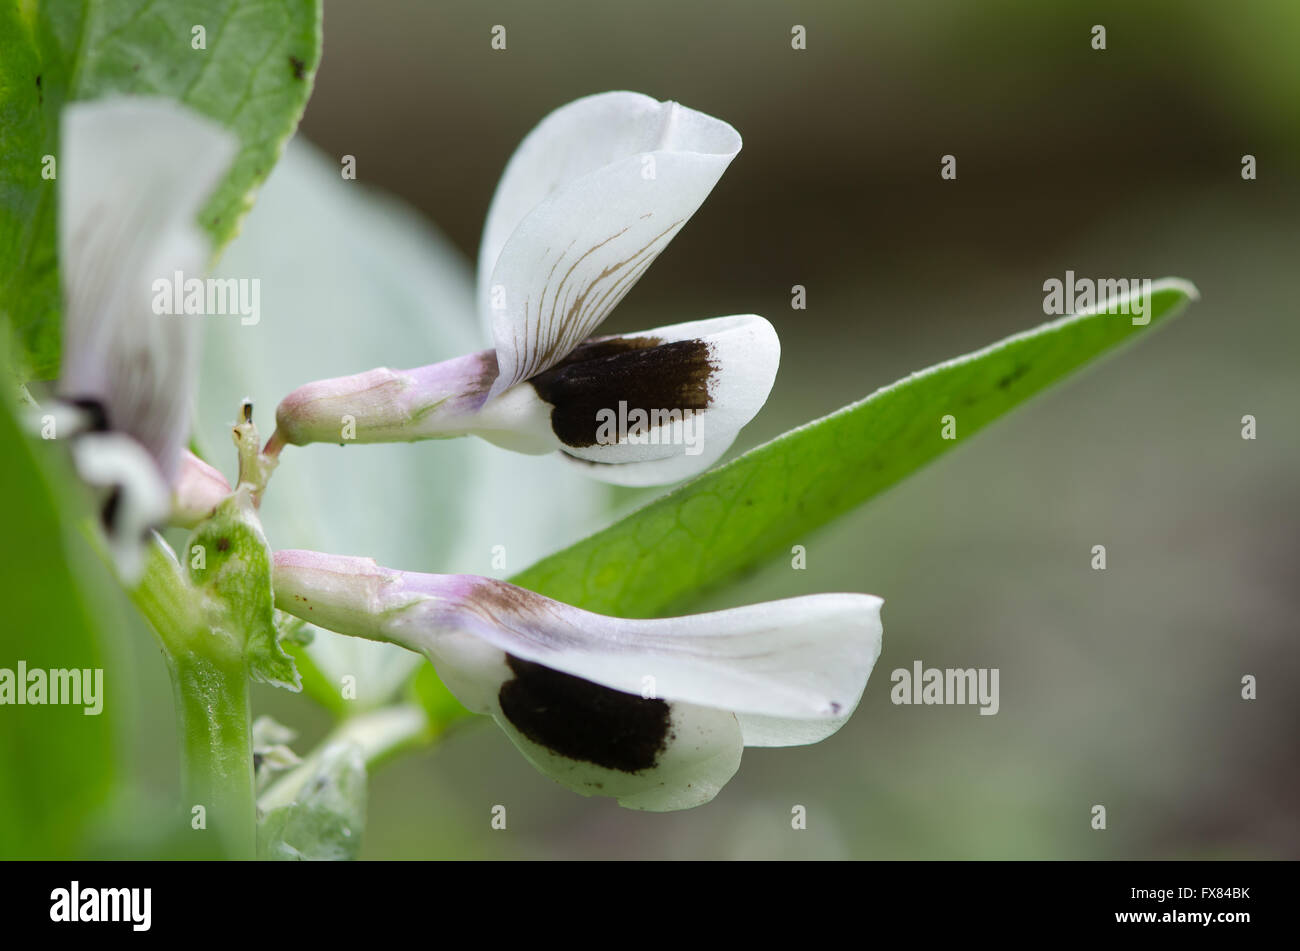 Broad bean (Vicia faba) flowers. Flowers on the ancient vegetable also known as fava, faba, field or bell bean Stock Photo